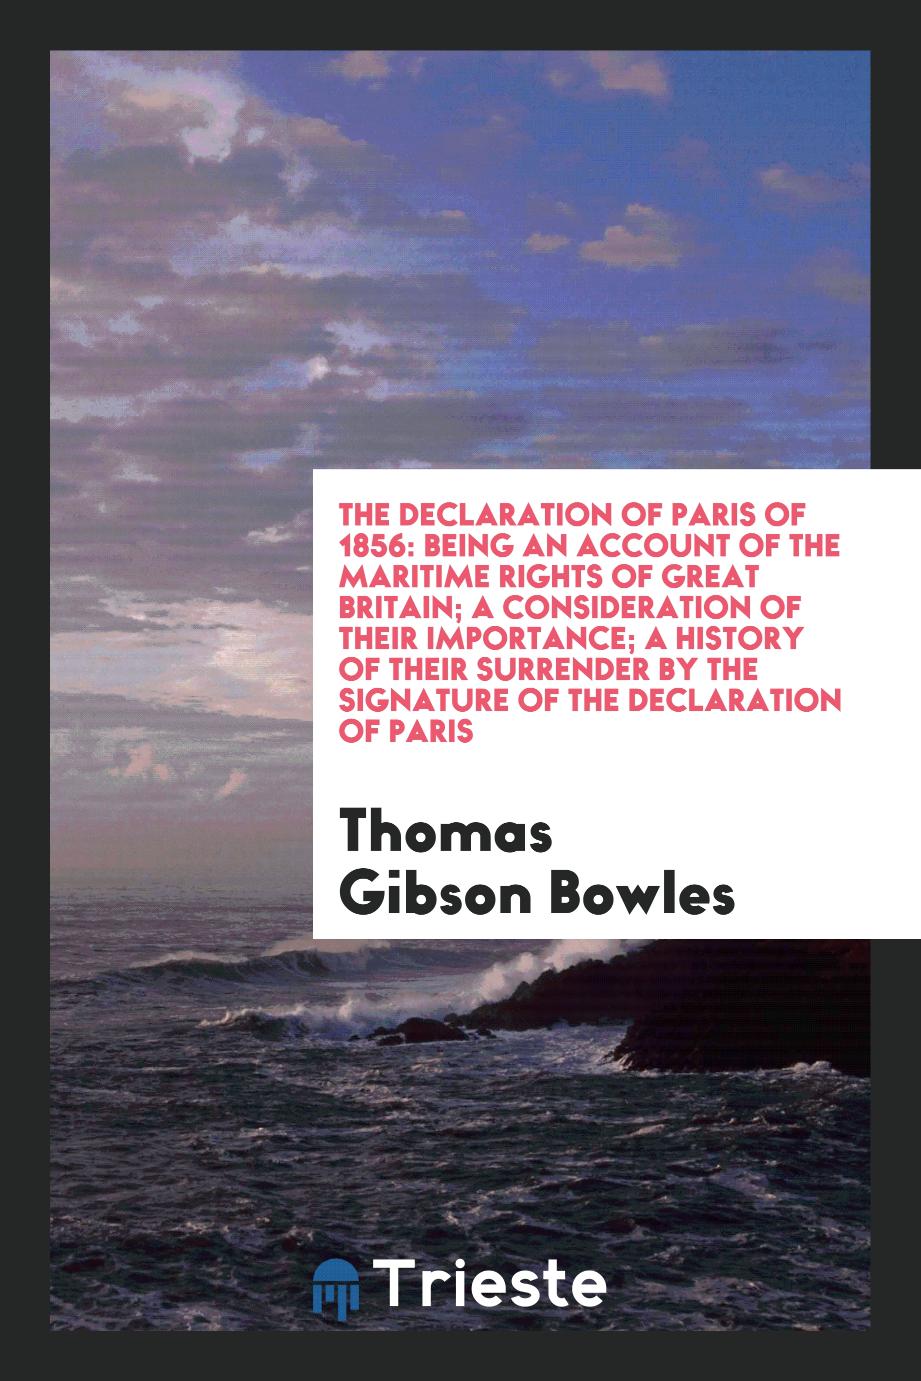 Thomas Gibson Bowles - The Declaration of Paris of 1856: Being an Account of the Maritime Rights of Great Britain; A Consideration of Their Importance; A History of Their Surrender by the Signature of the Declaration of Paris